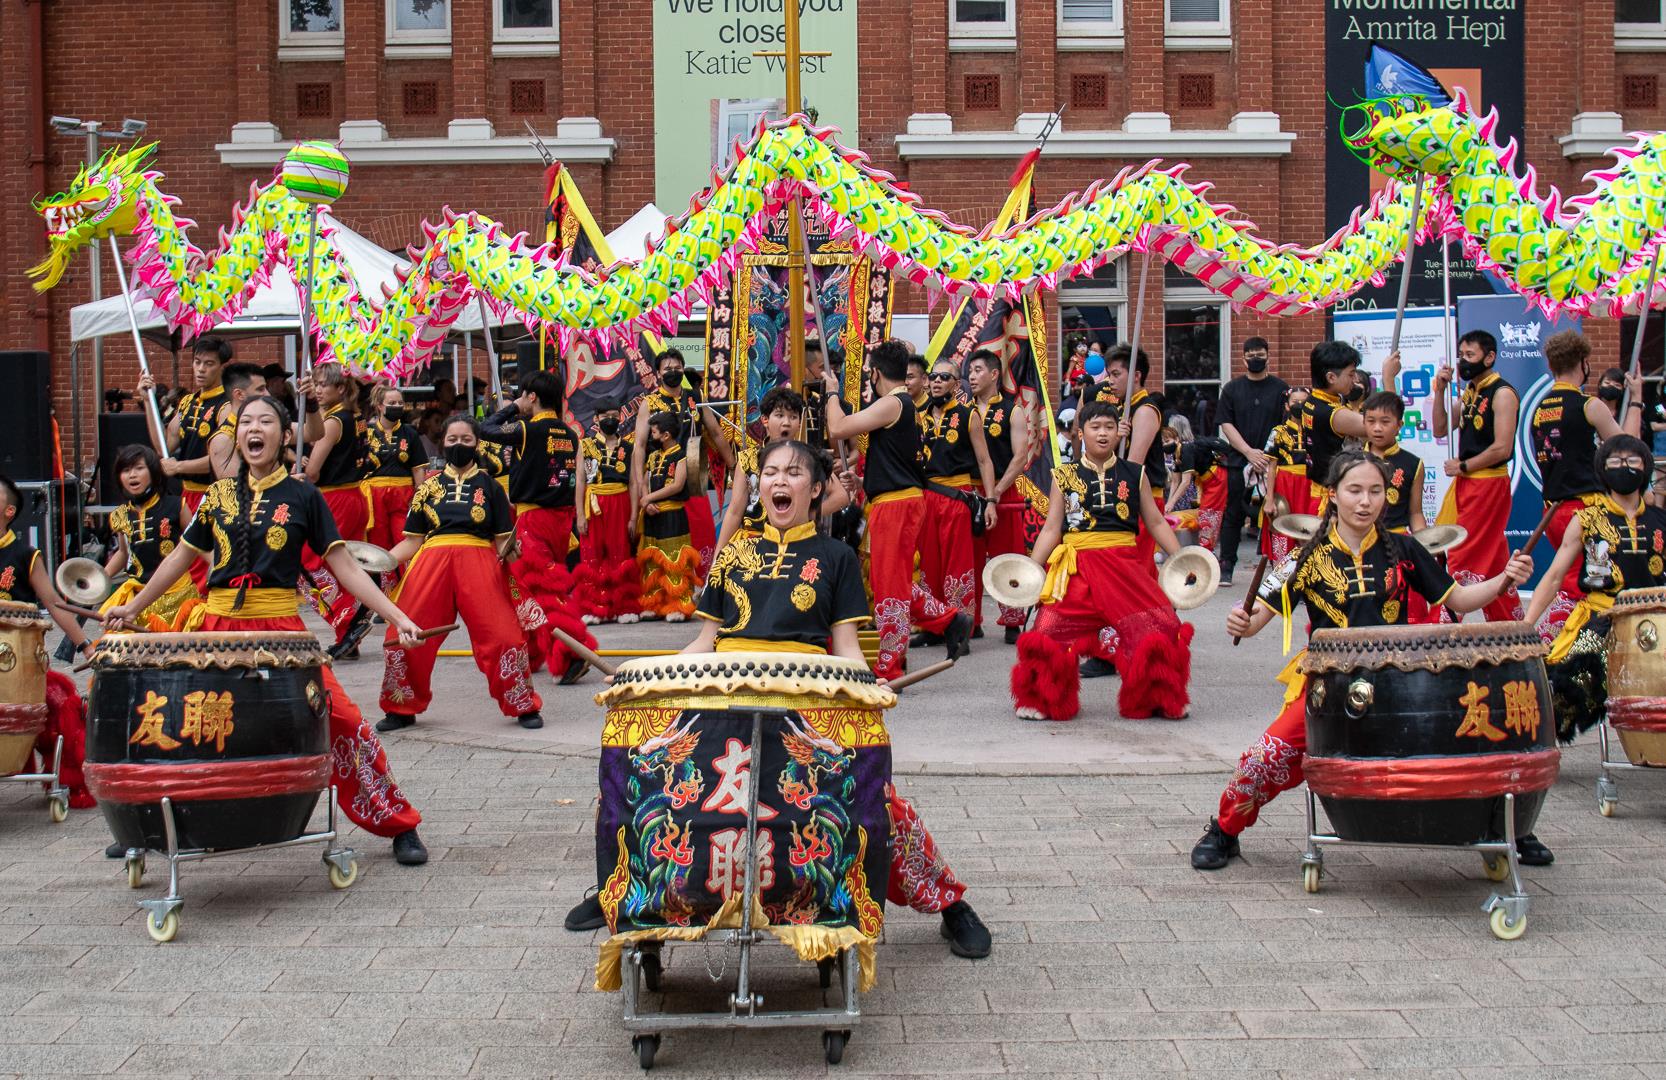 Drummers and performers at a Chinese New Year celebration